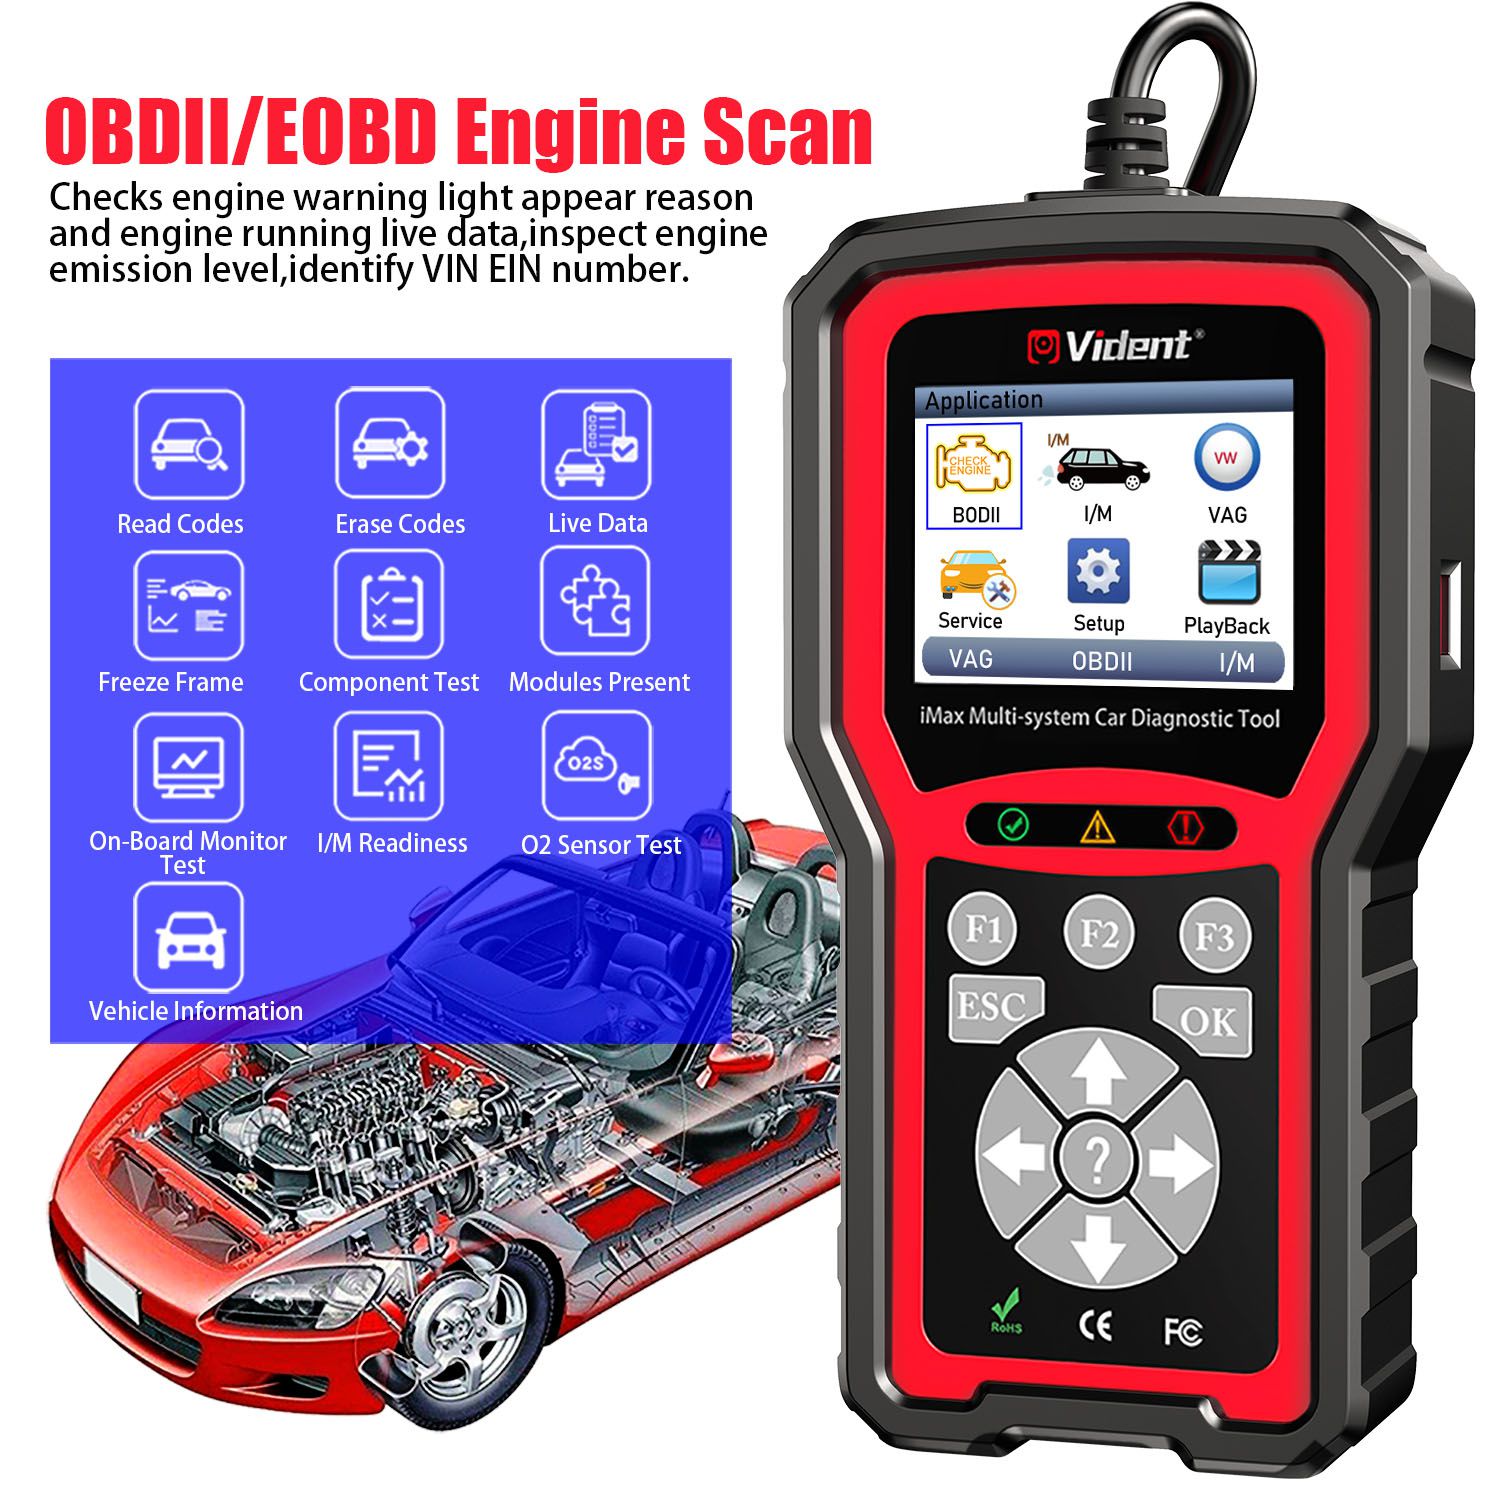 VIDENT iMax4301 VAWS V-A-G OBD Diagnostic Service Tool Supports 9 Special Functions